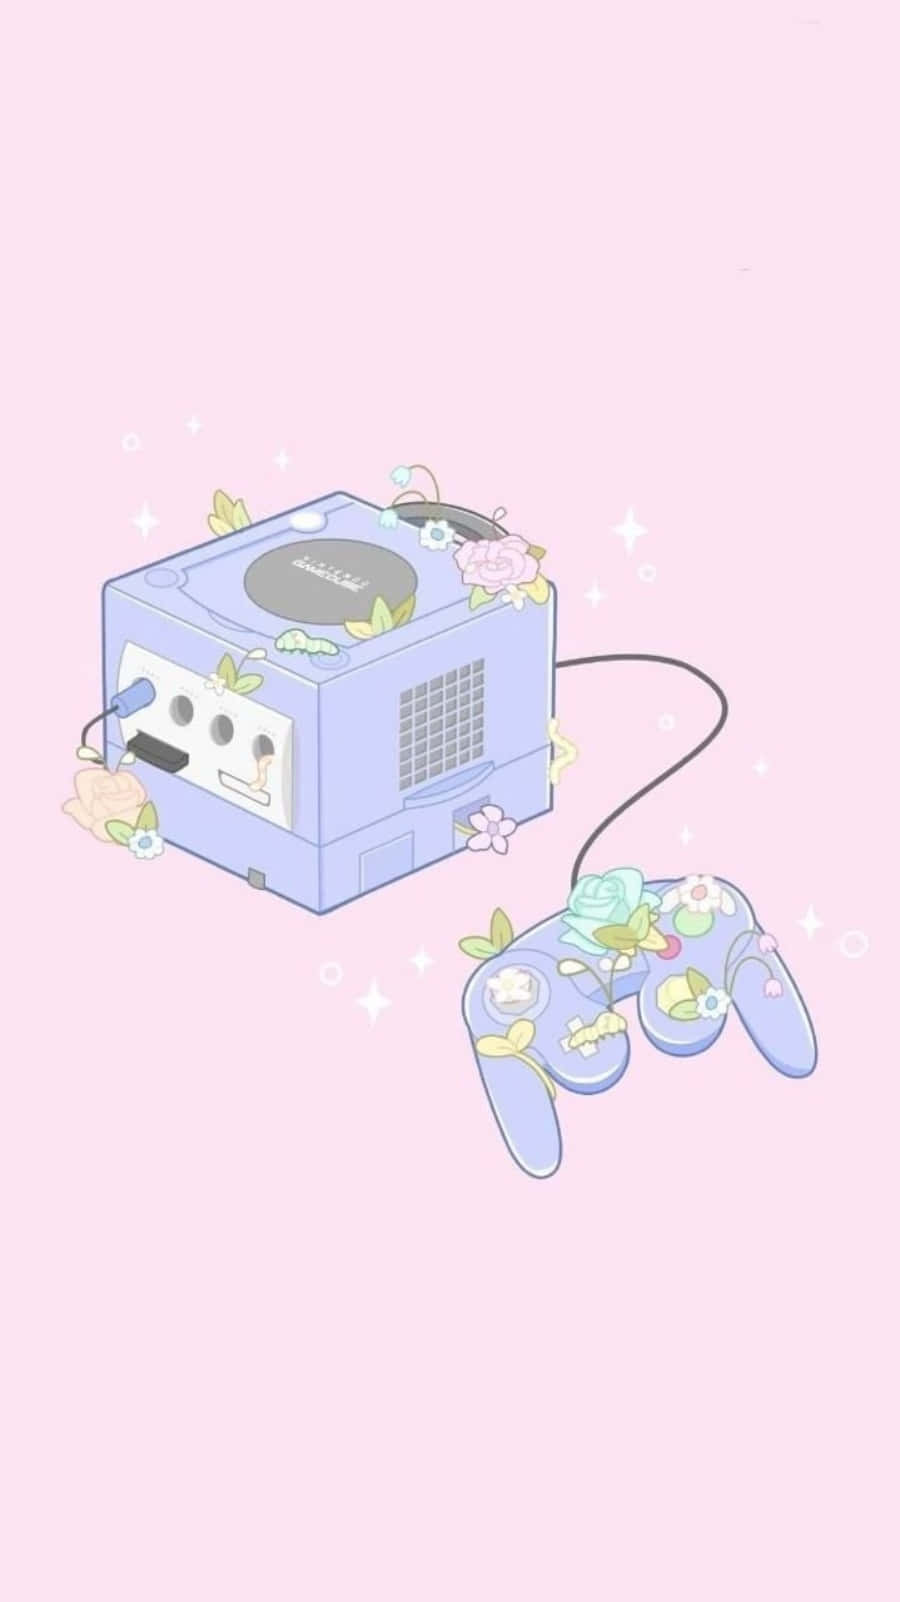 Gamecube wallpaper by accomplice88  Download on ZEDGE  fa29